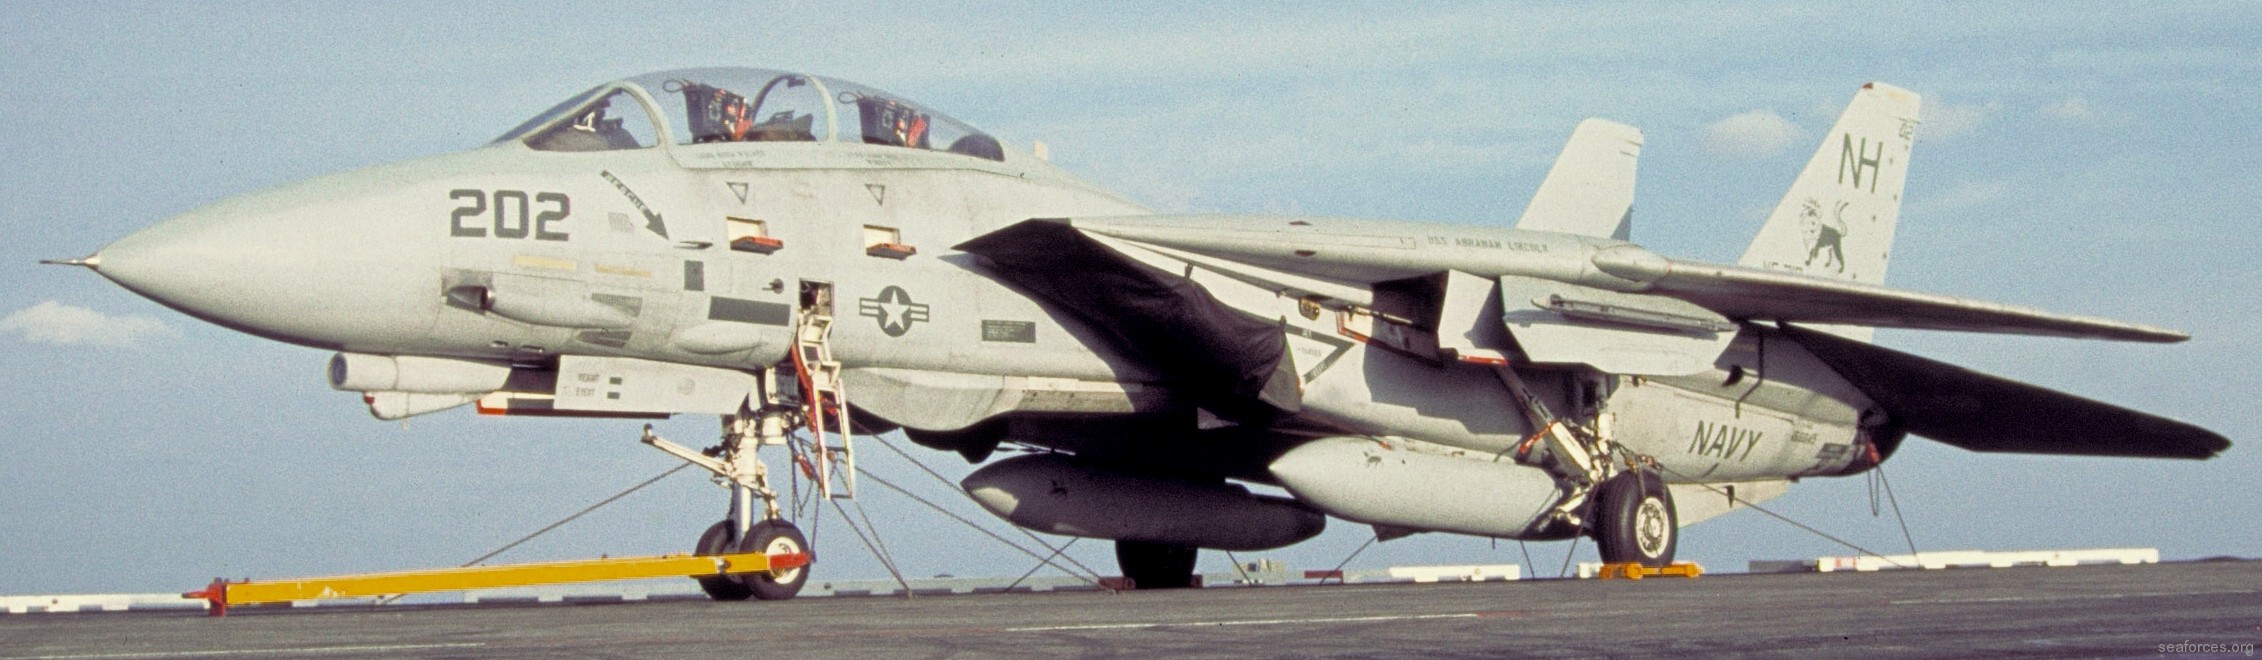 vf-213 black lions fighter squadron us navy f-14a tomcat carrier air wing cvw-11 uss abraham lincoln cvn-72 67